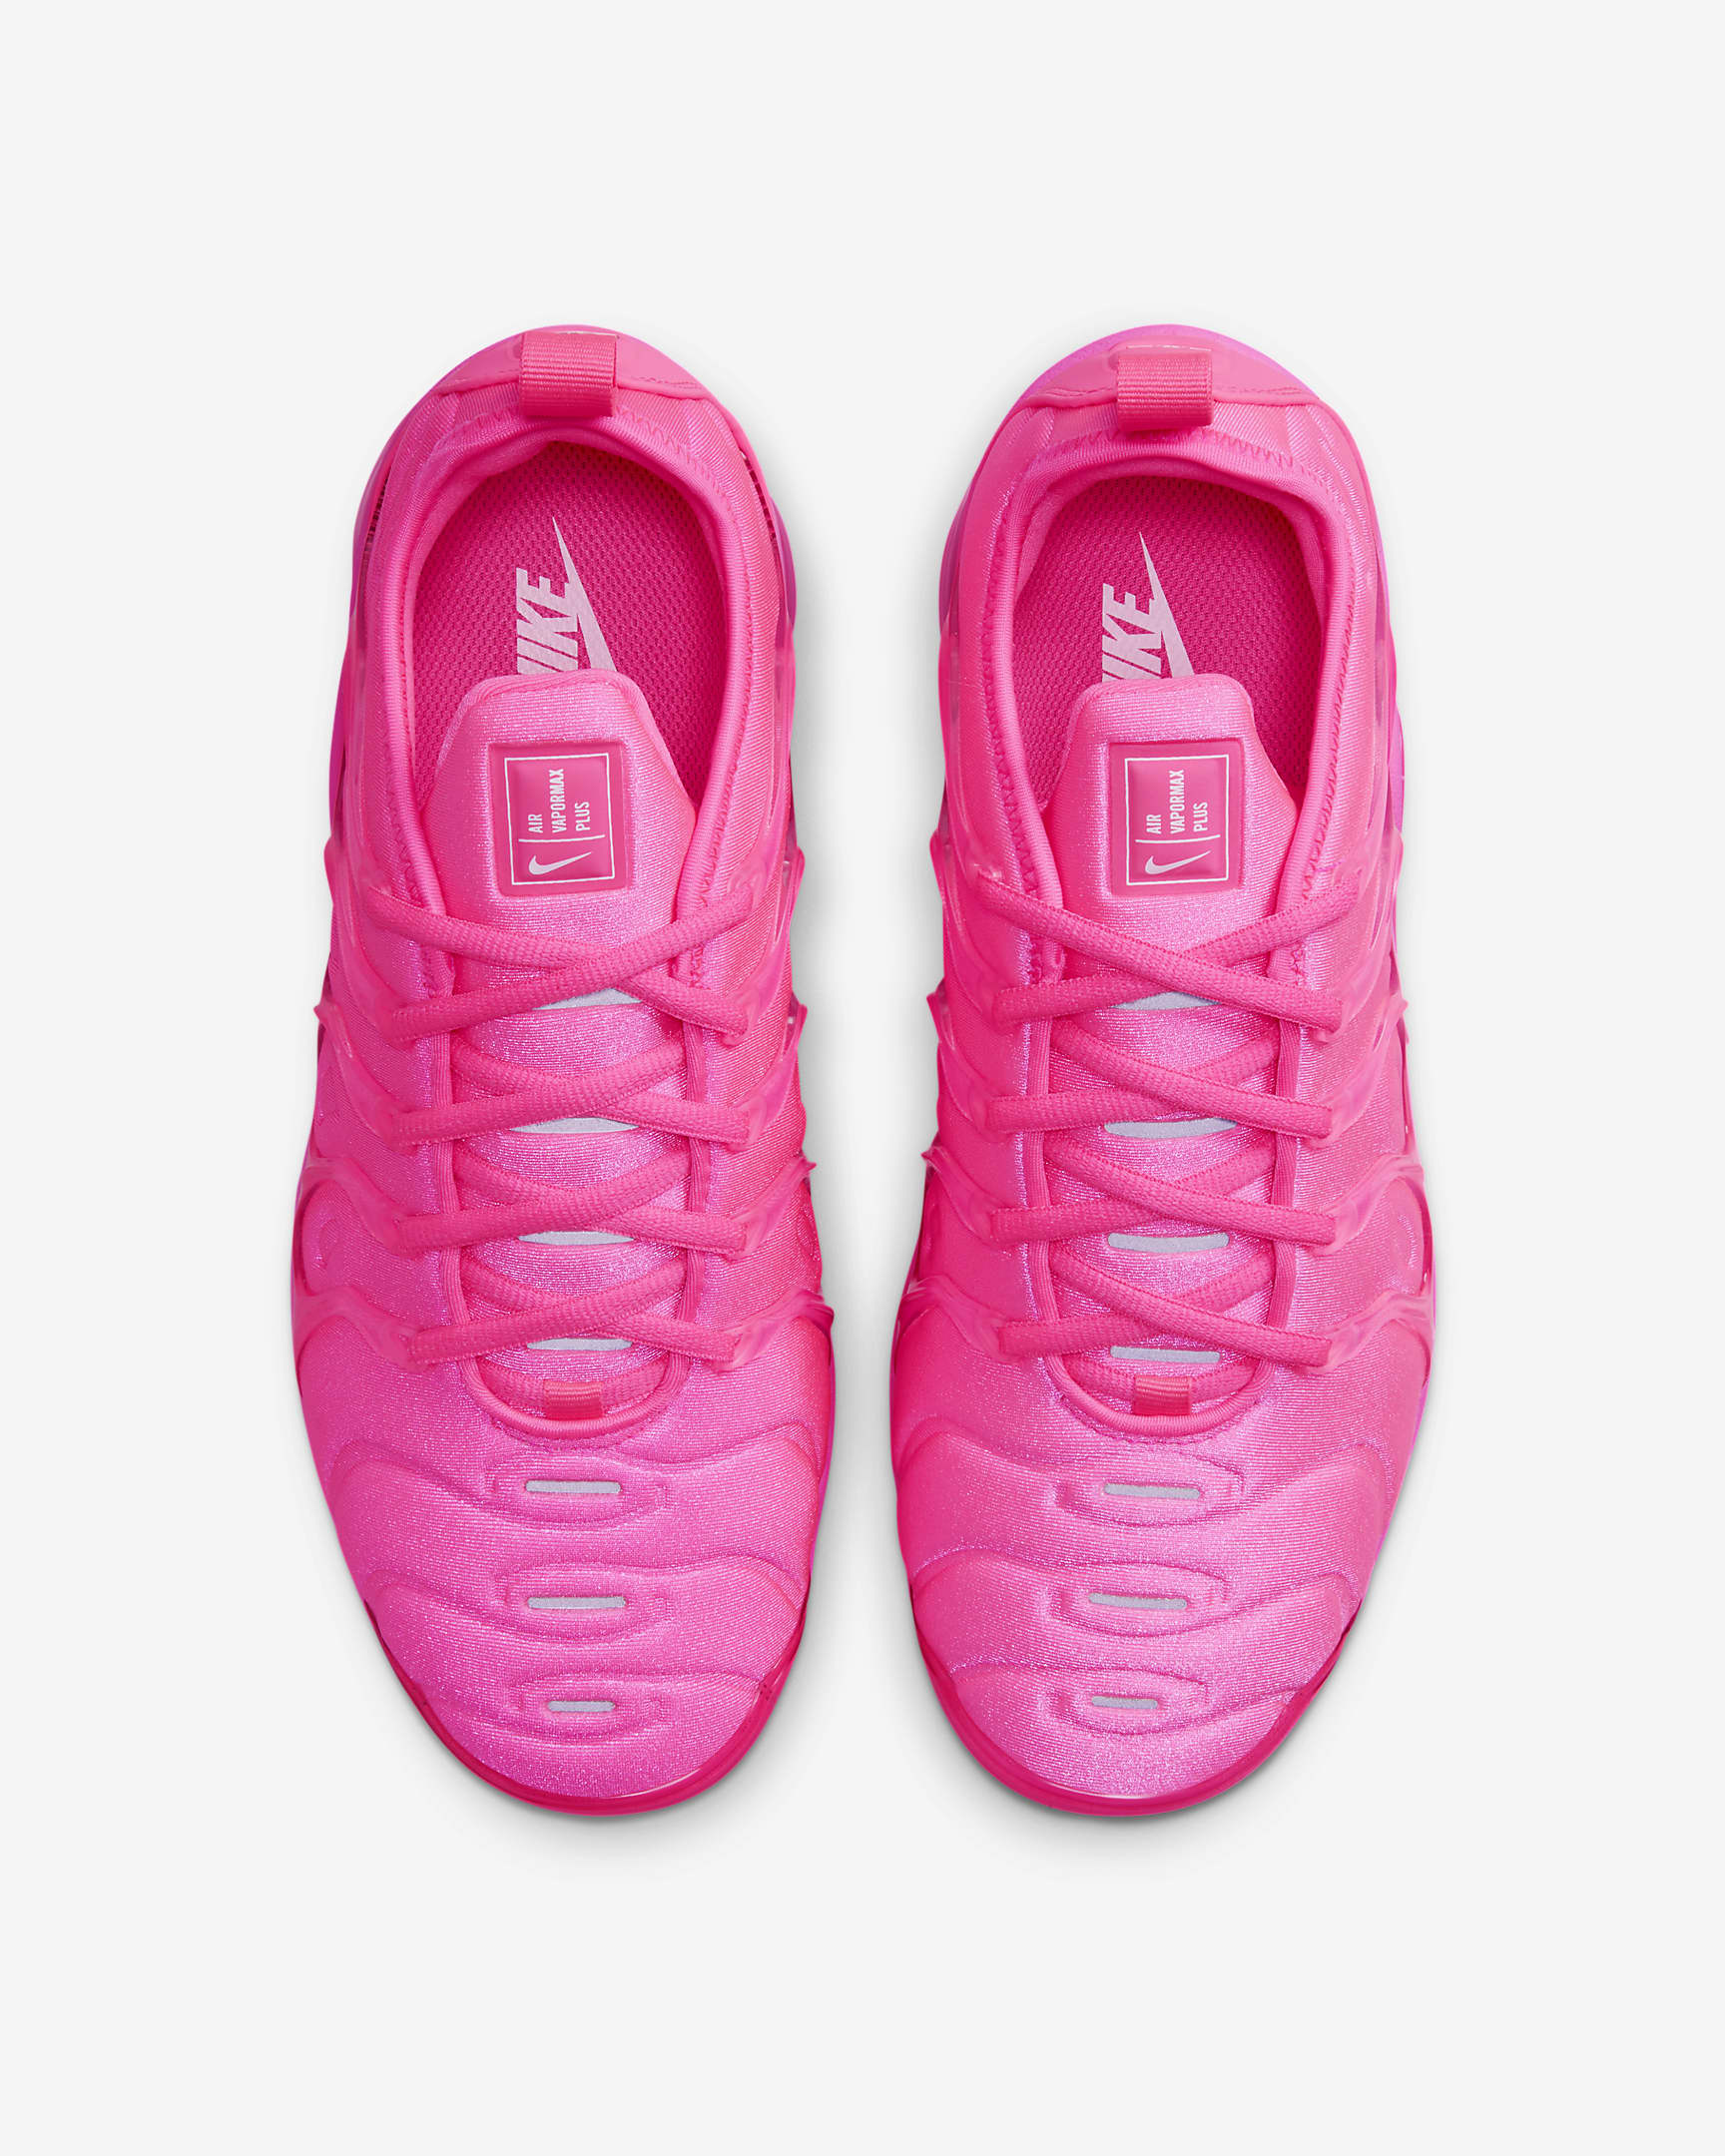 Breaking News: Nike Air VaporMax Plus Women’s Shoes Just Dropped – Must-Have or Miss Out?